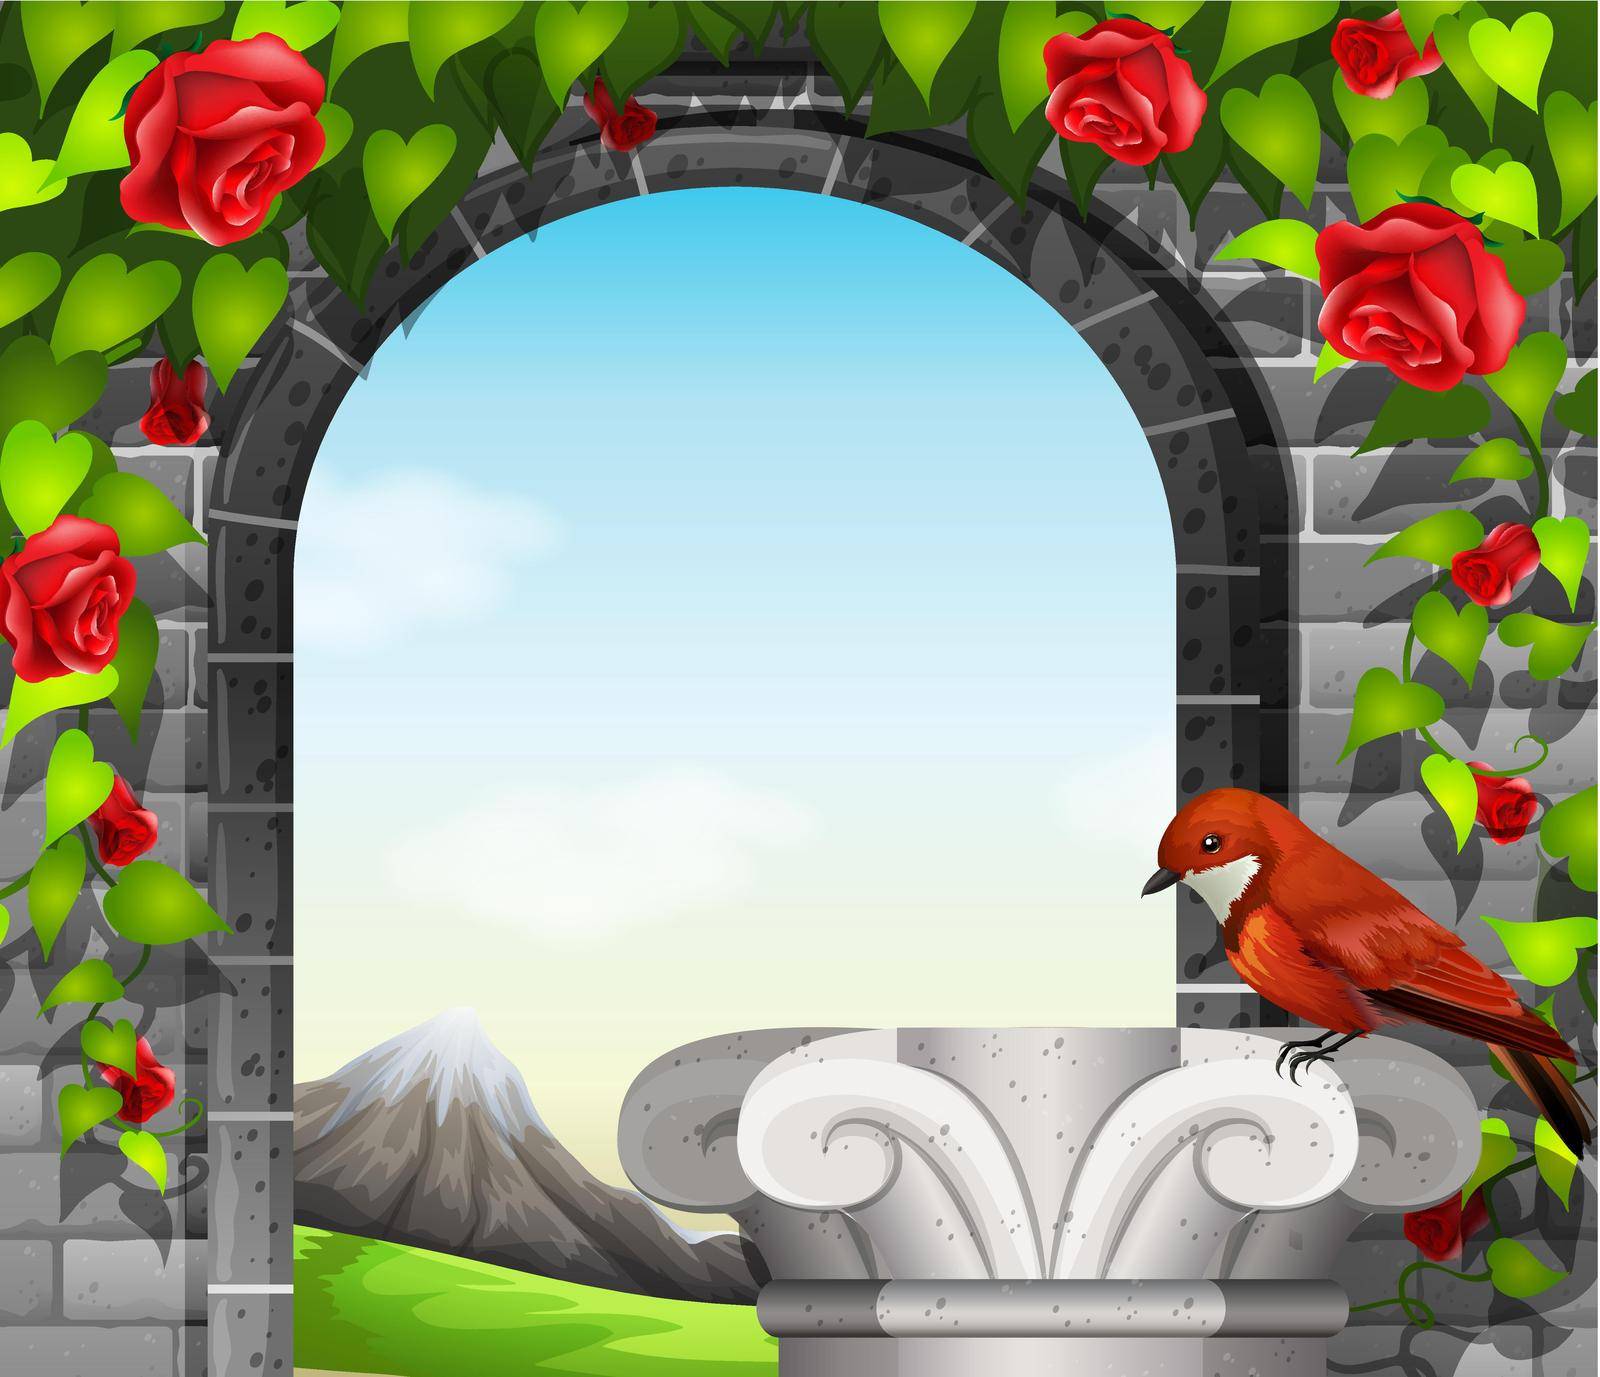 A stonewall with roses and a bird